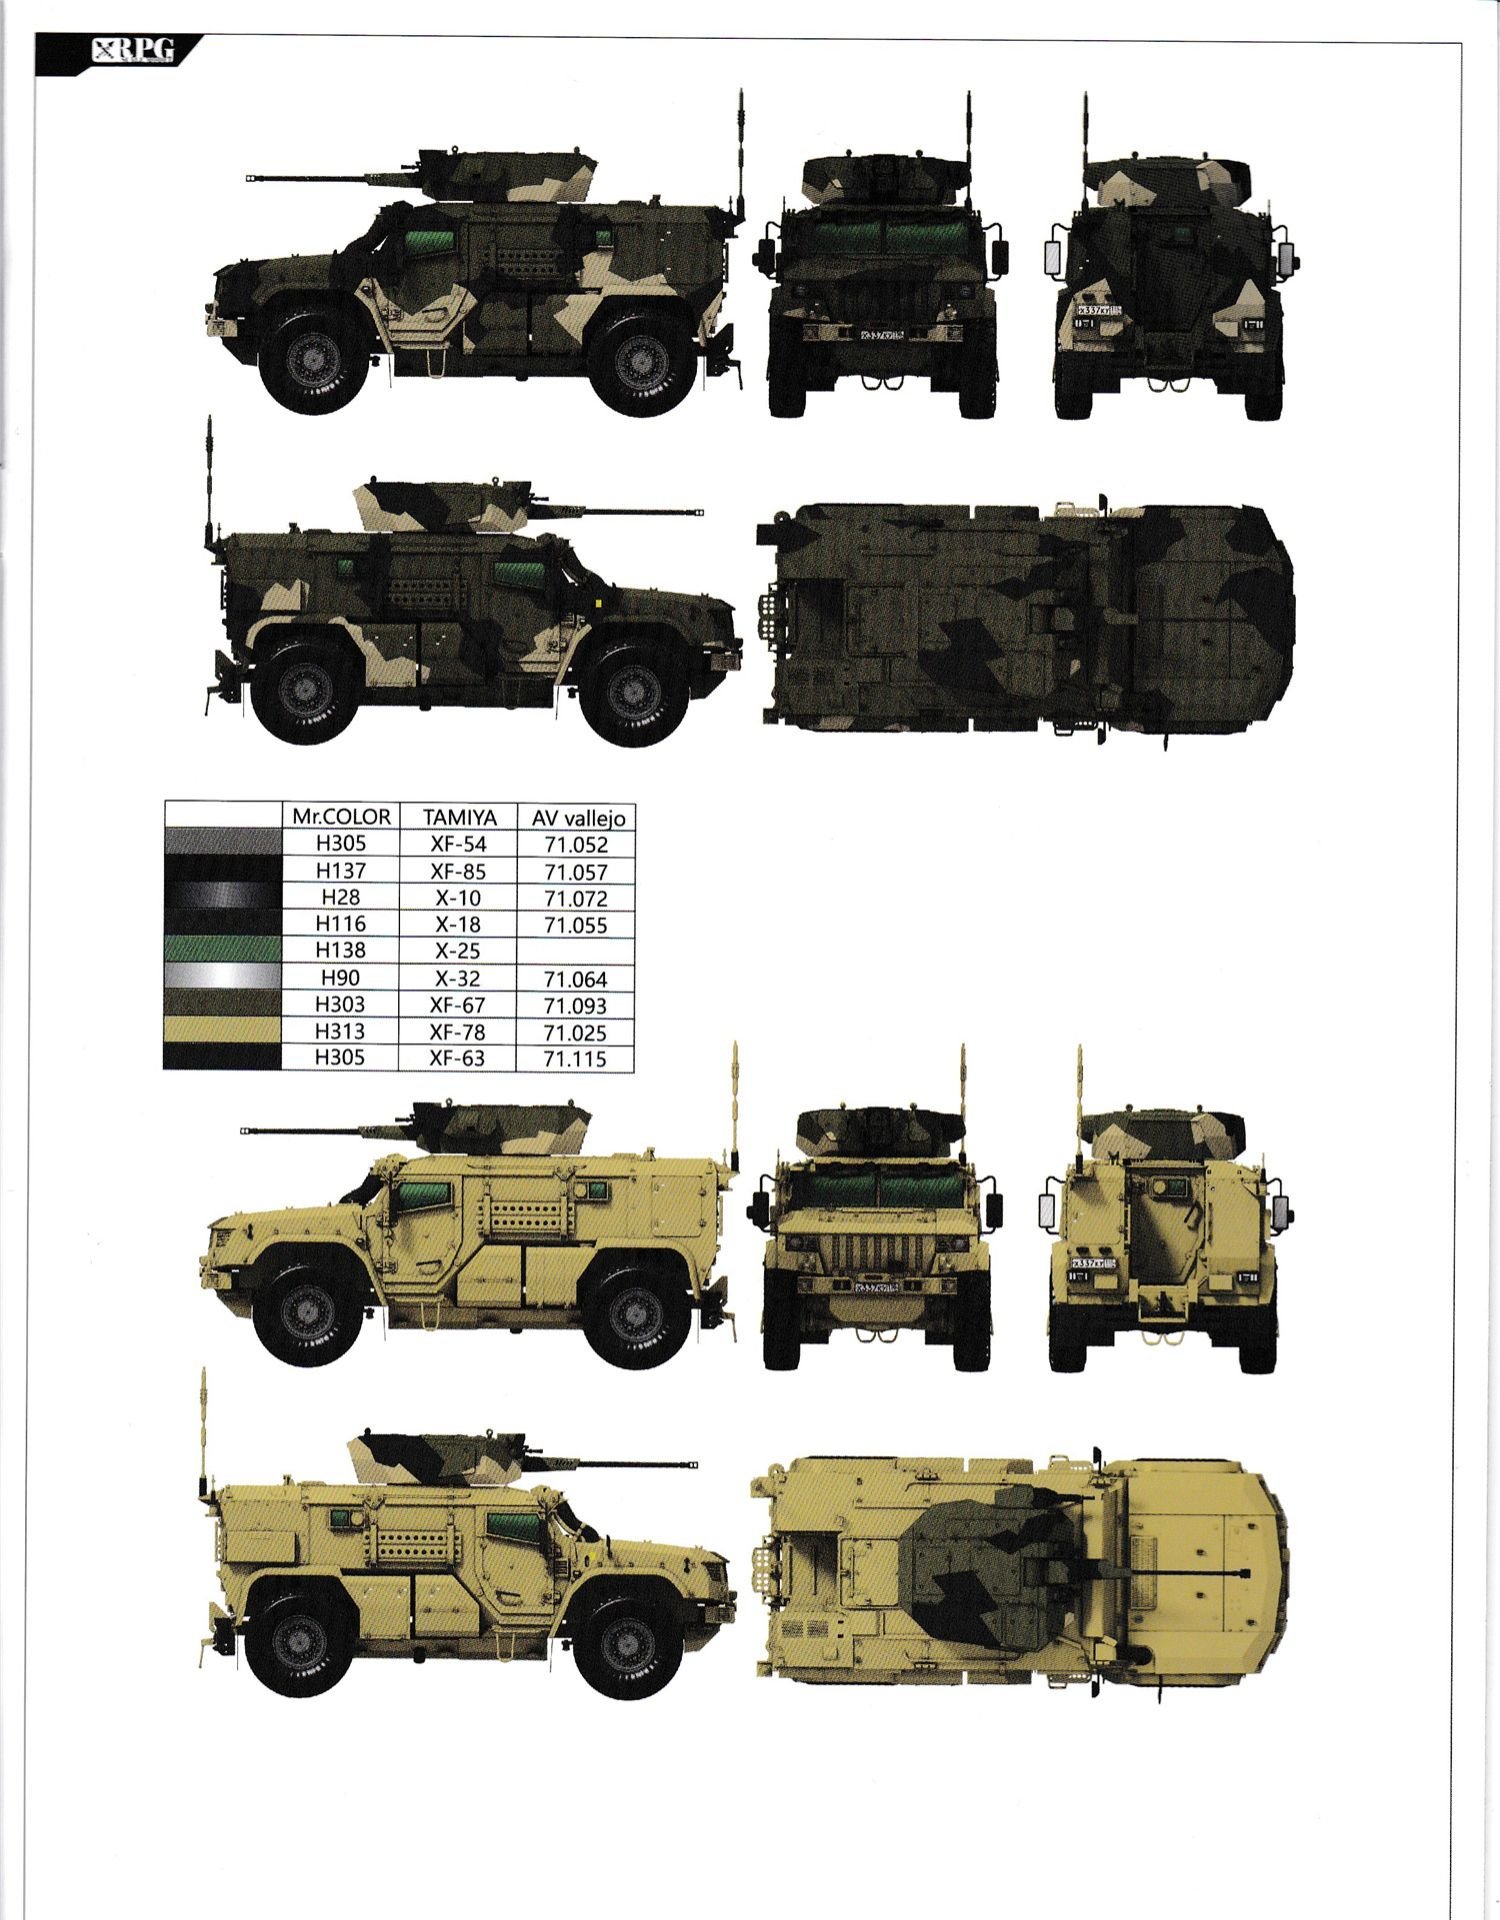 1/35 KamAZ K-4386 Typhoon-VDV with 30mm 2A42 Cannon System - Click Image to Close